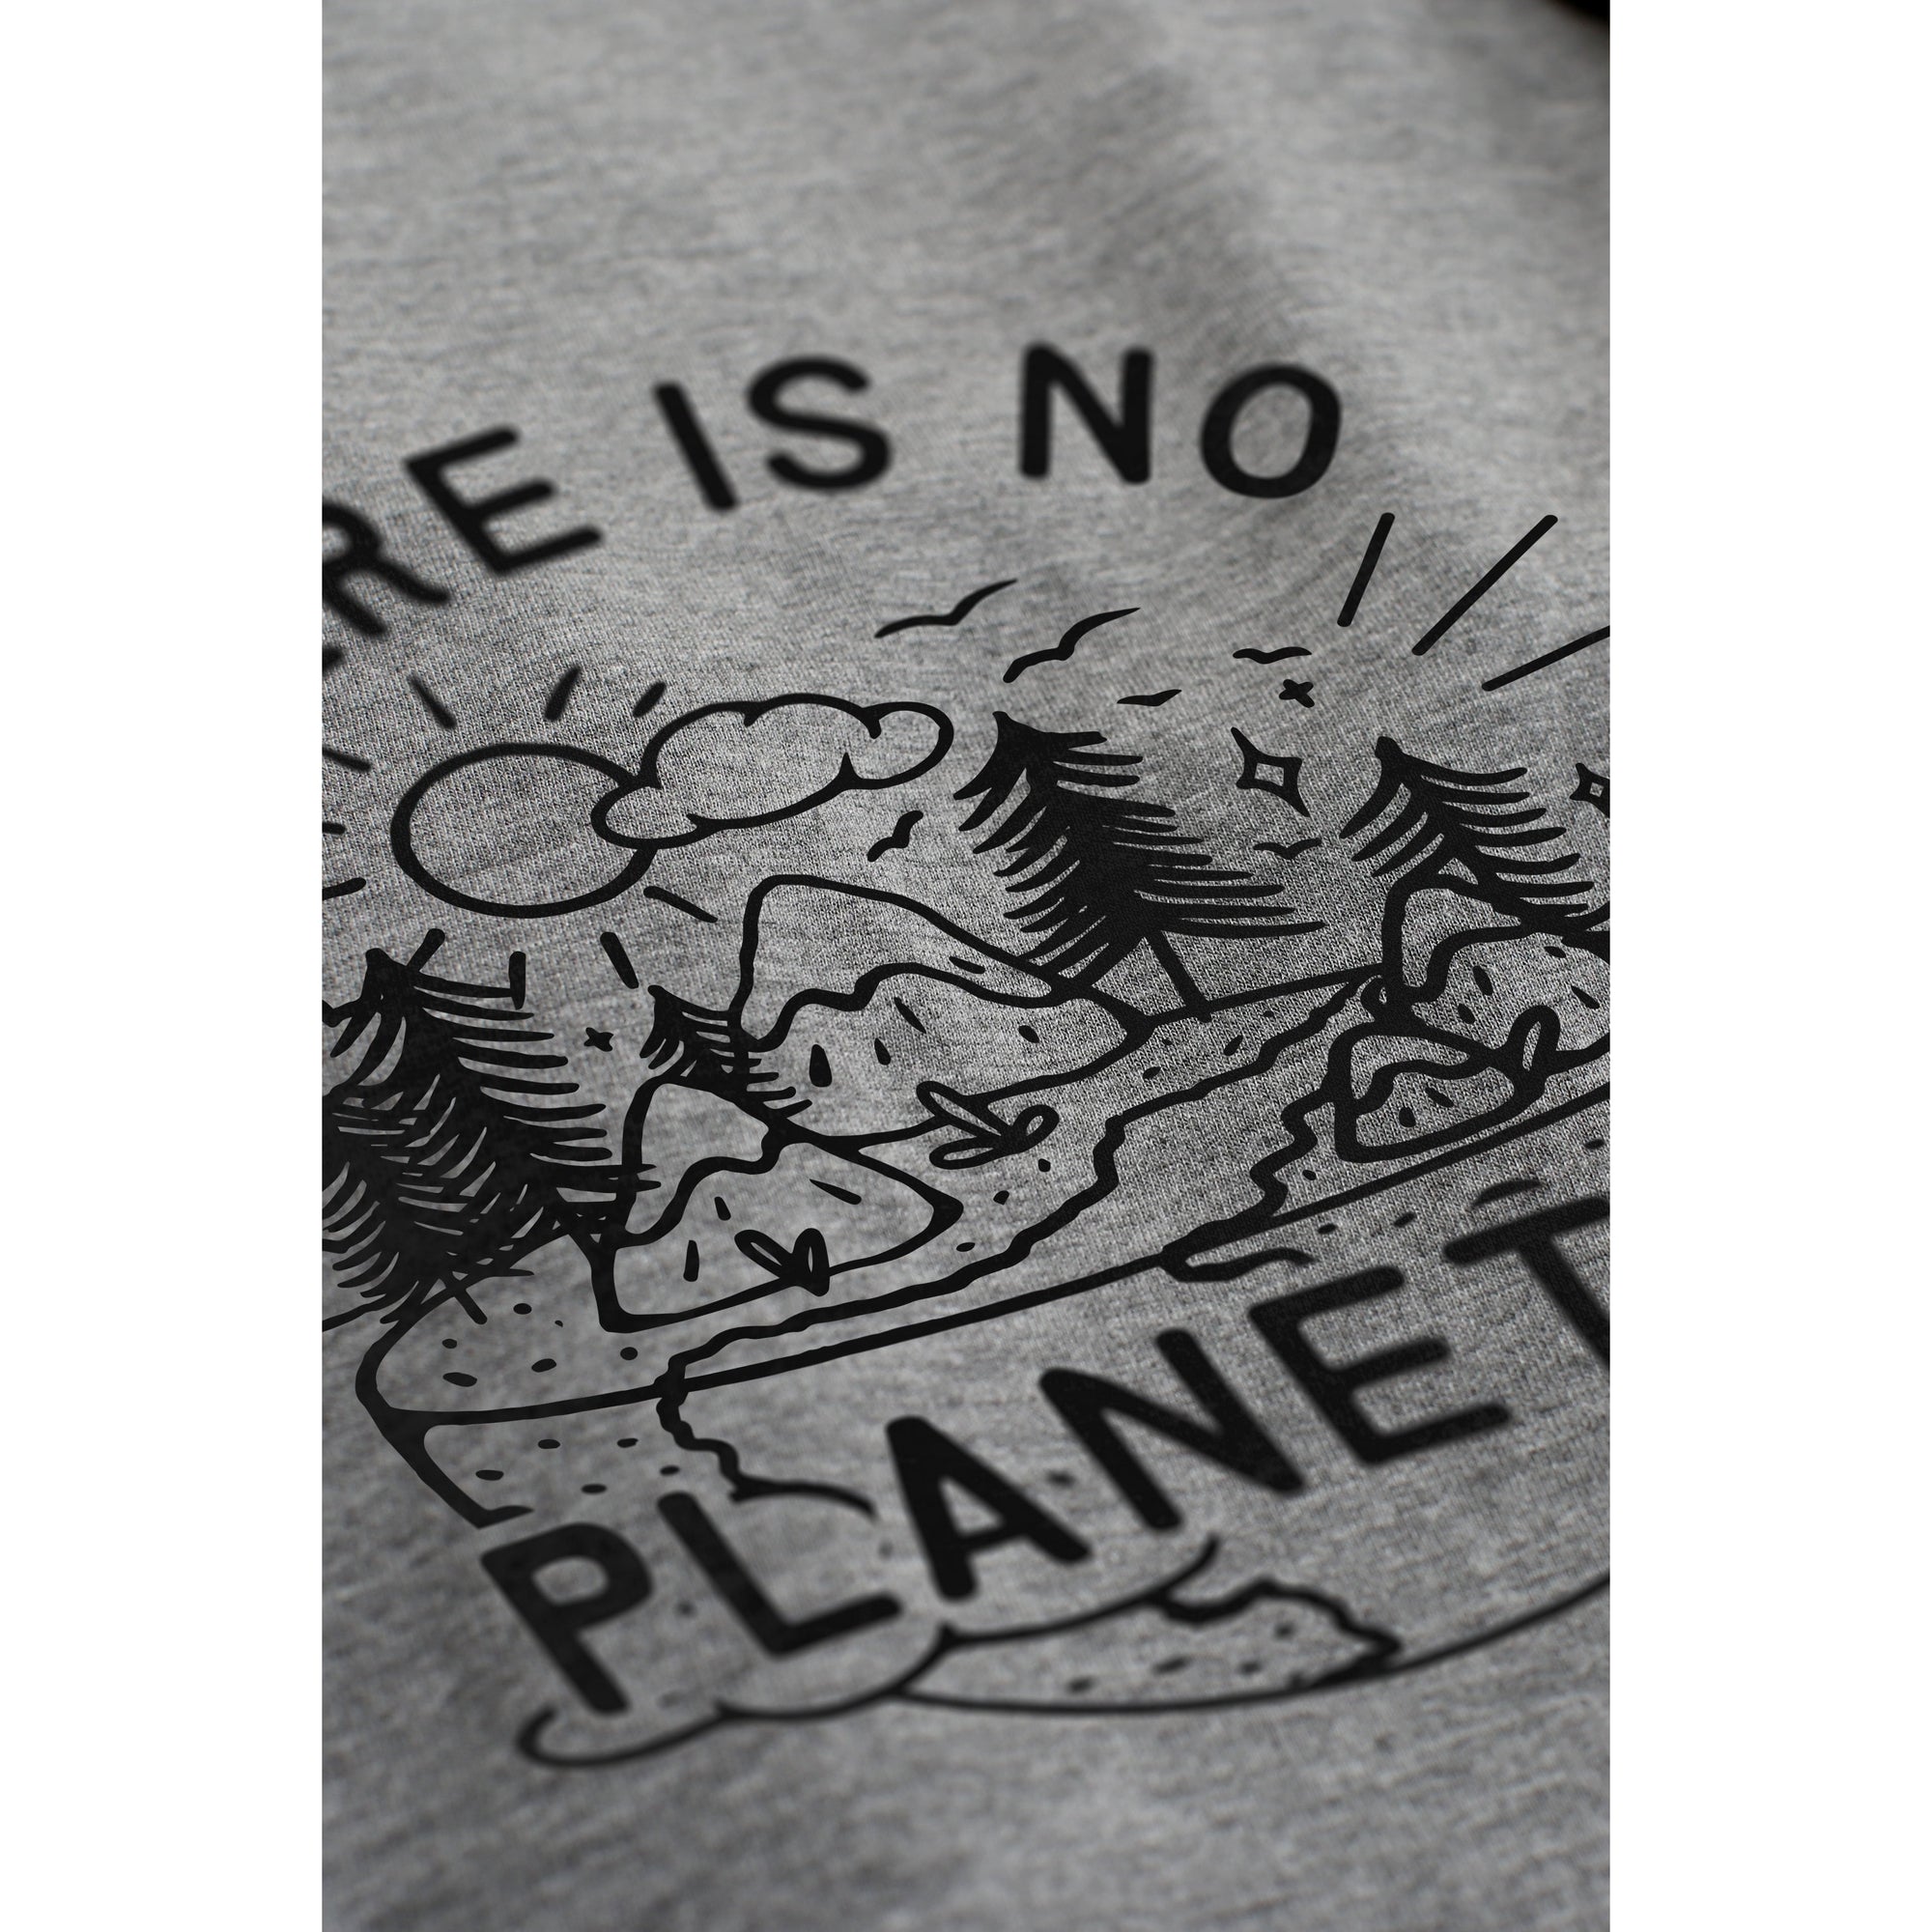 There Is No Planet B - Stories You Can Wear by Thread Tank